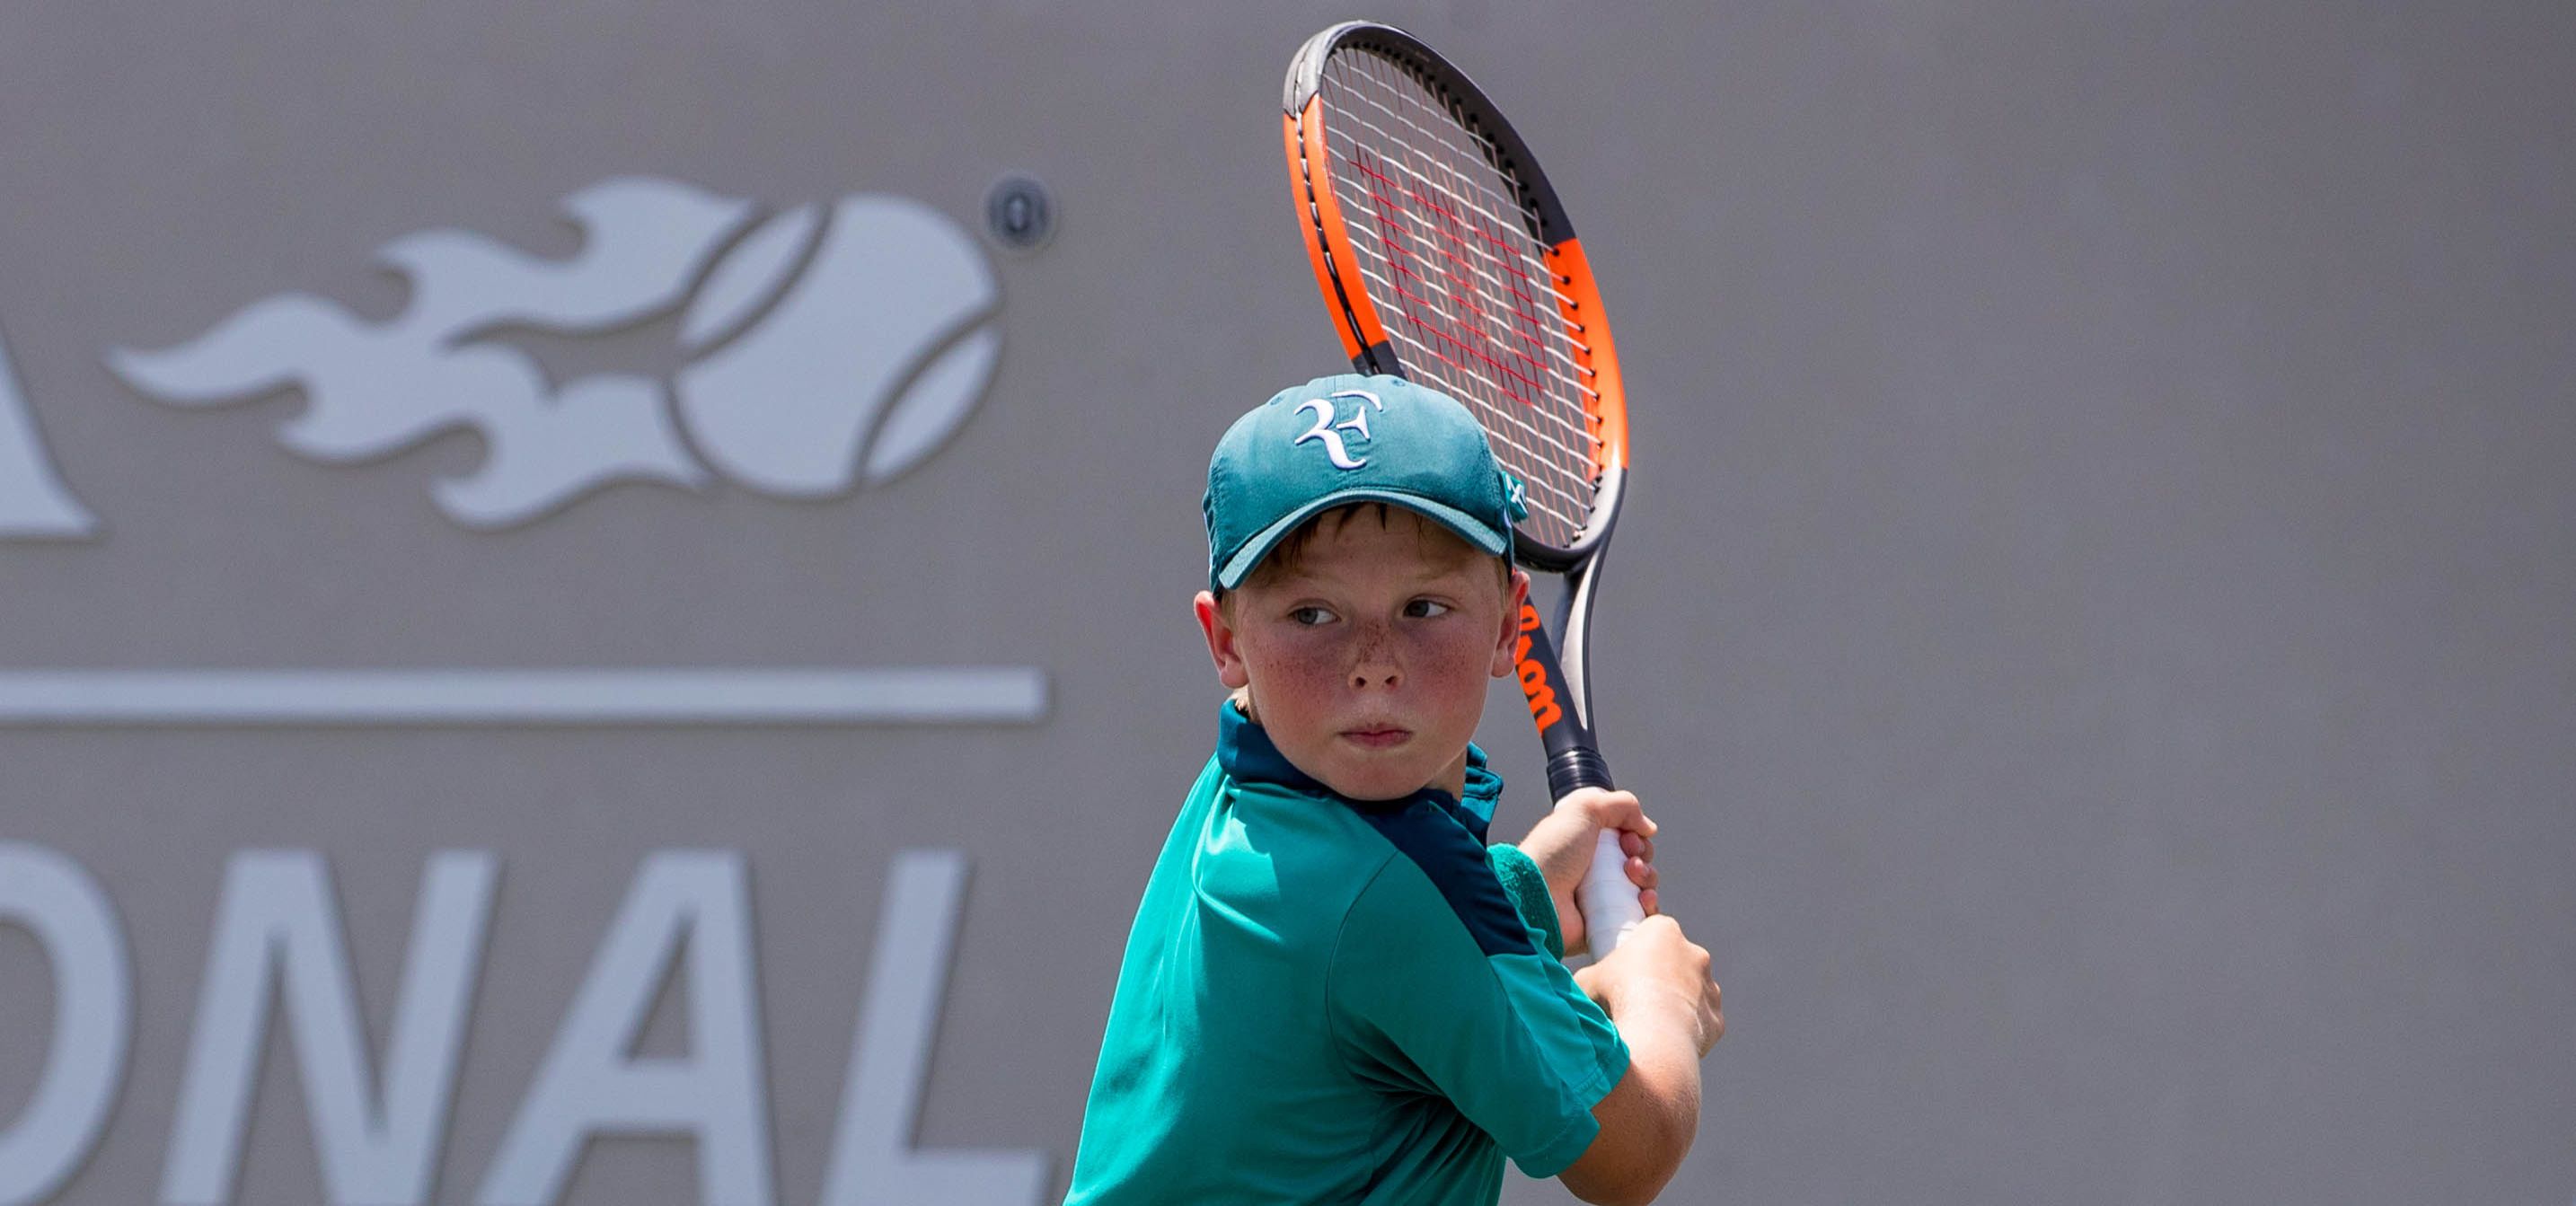 Exsted Repeats as Doubles Champion at 2019 USTA Boys' 12 National Clay